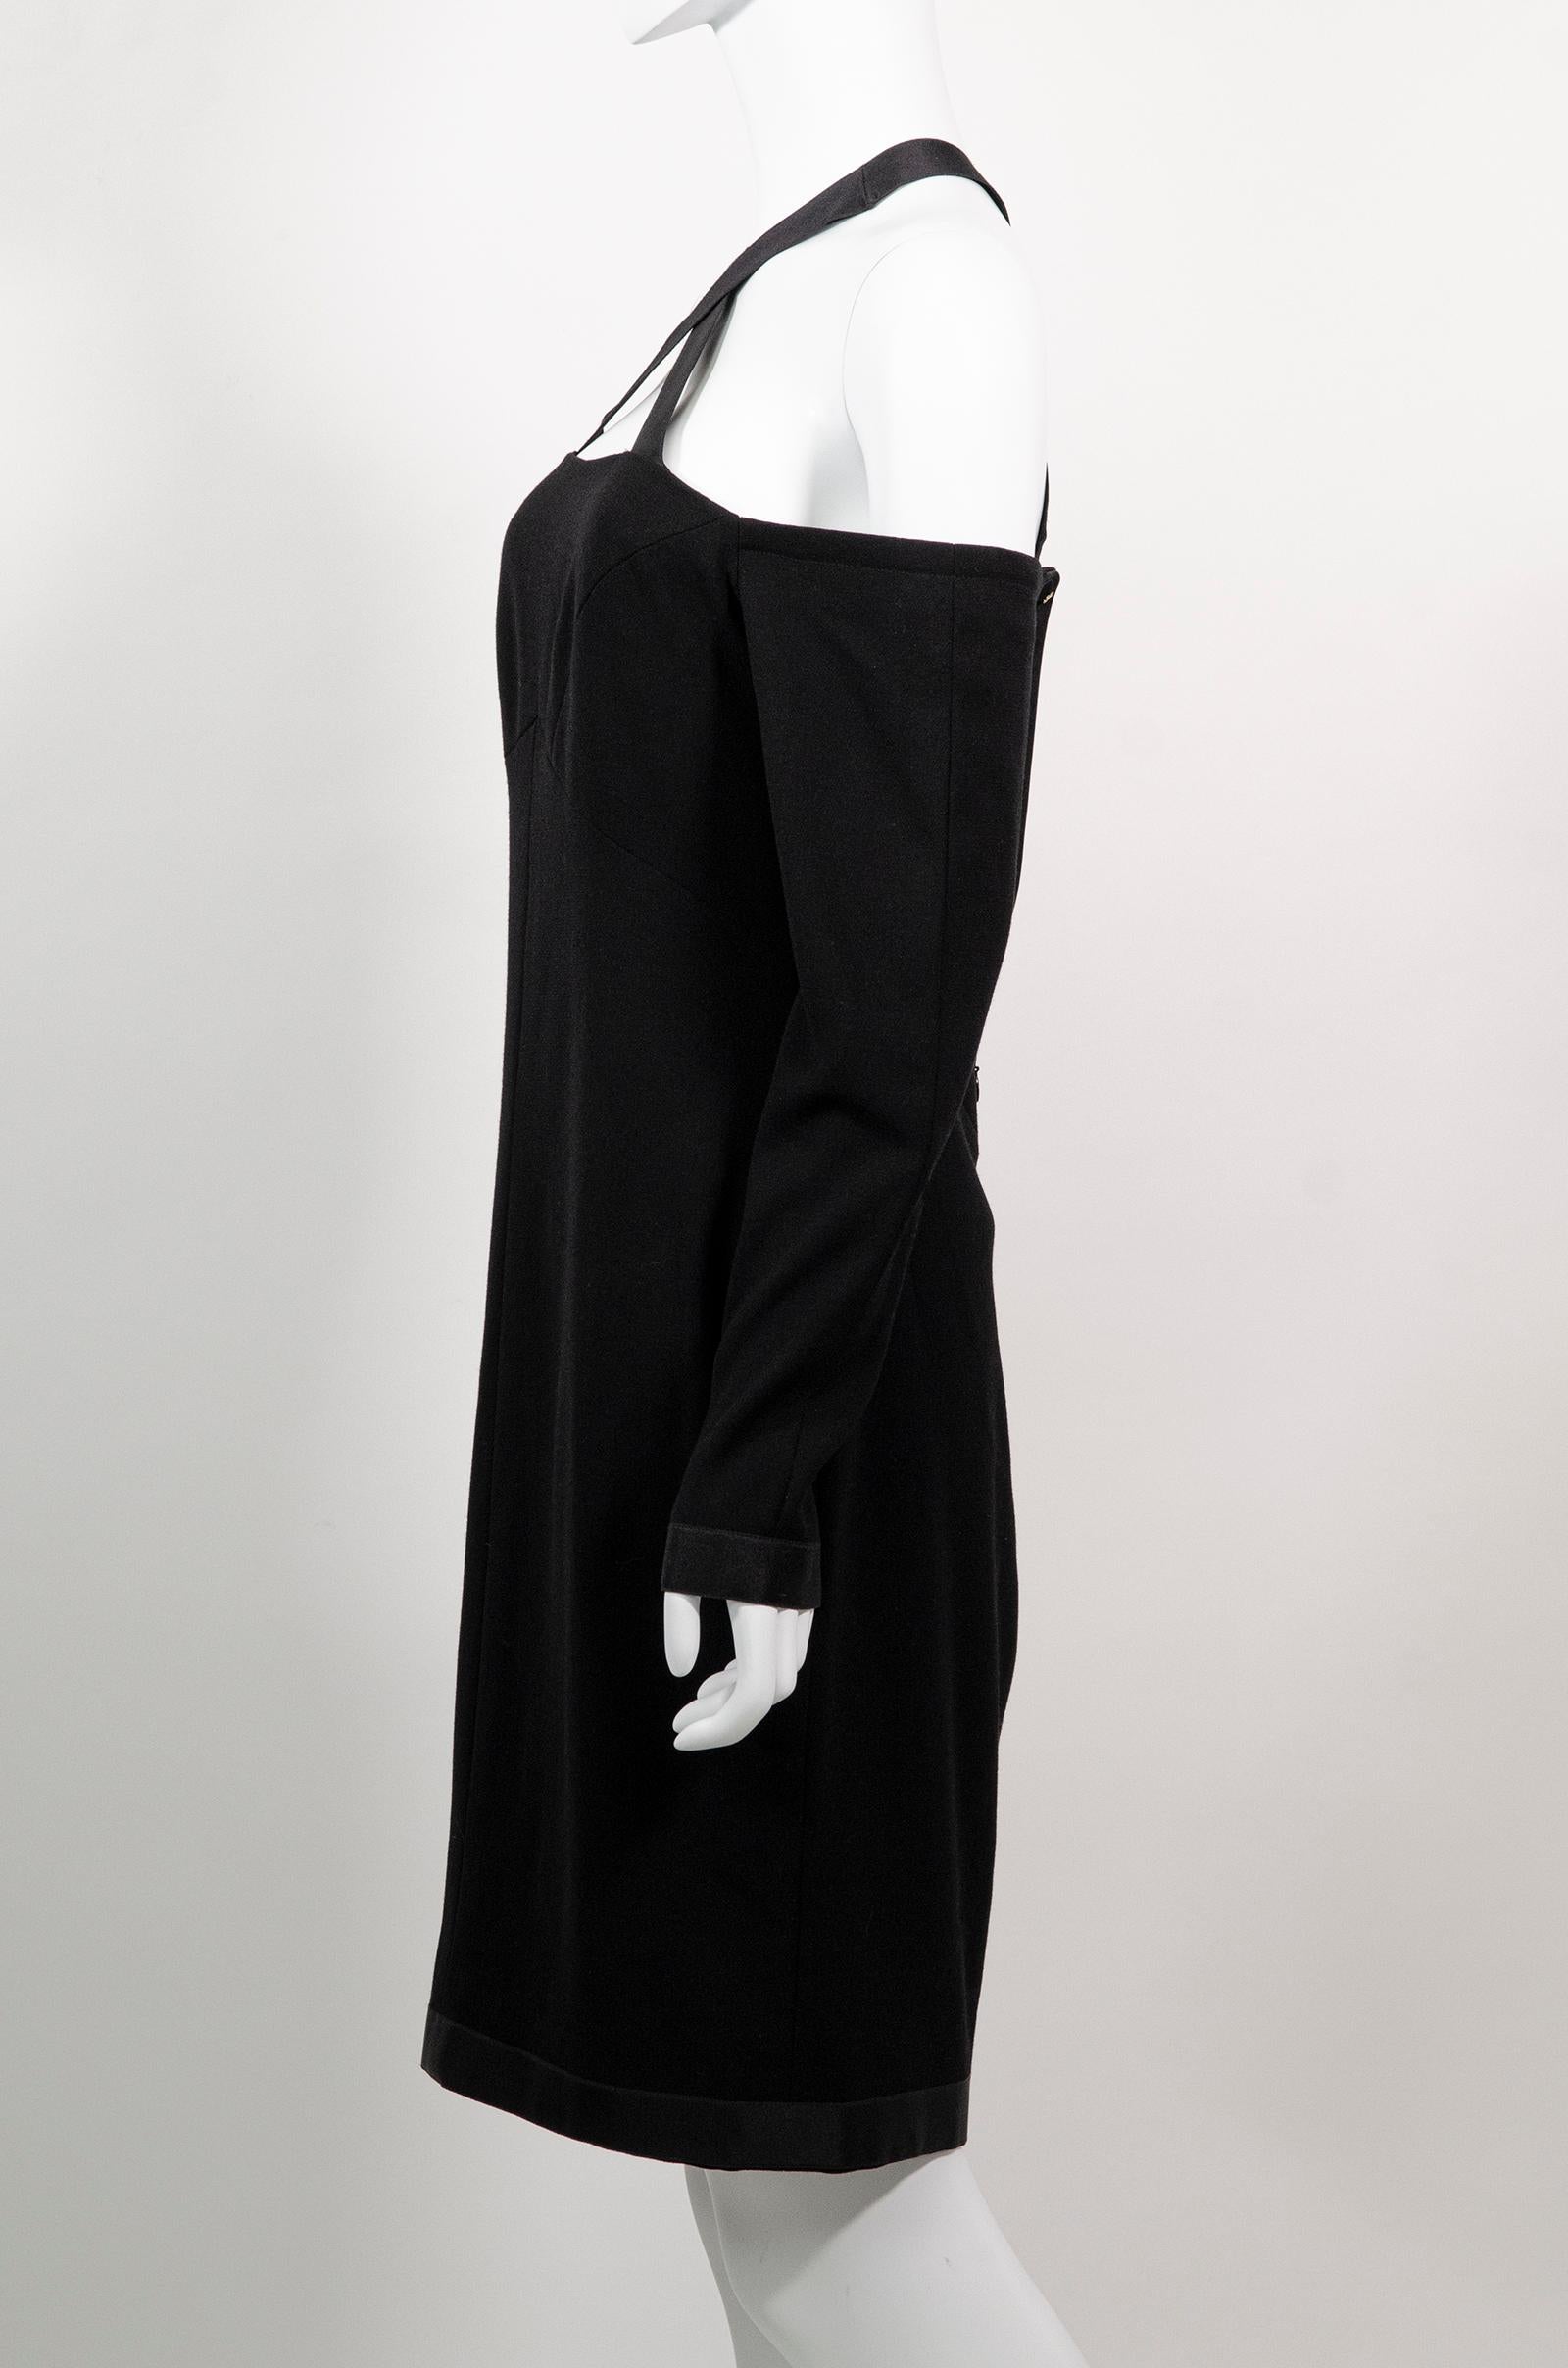 chanel black dress with white collar